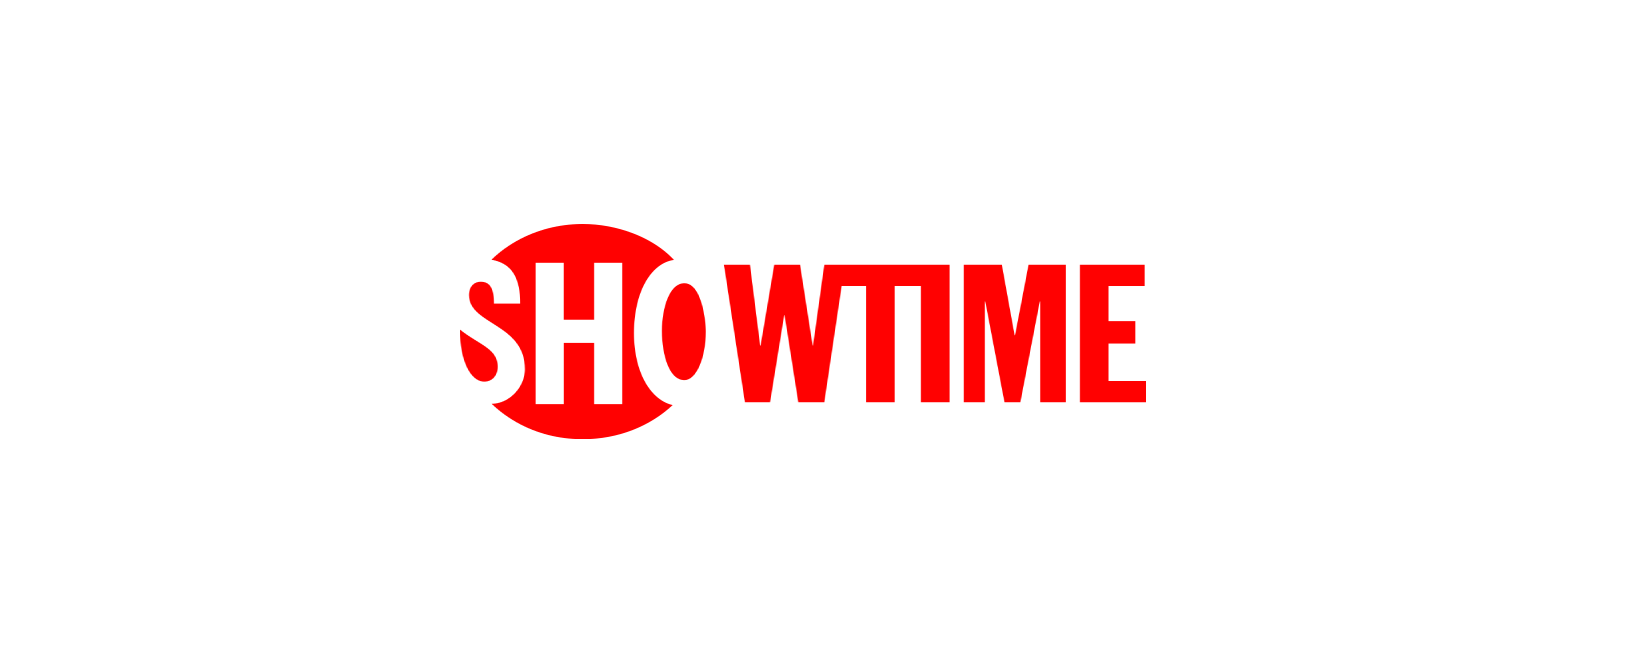 Showtime Discount Code 2022